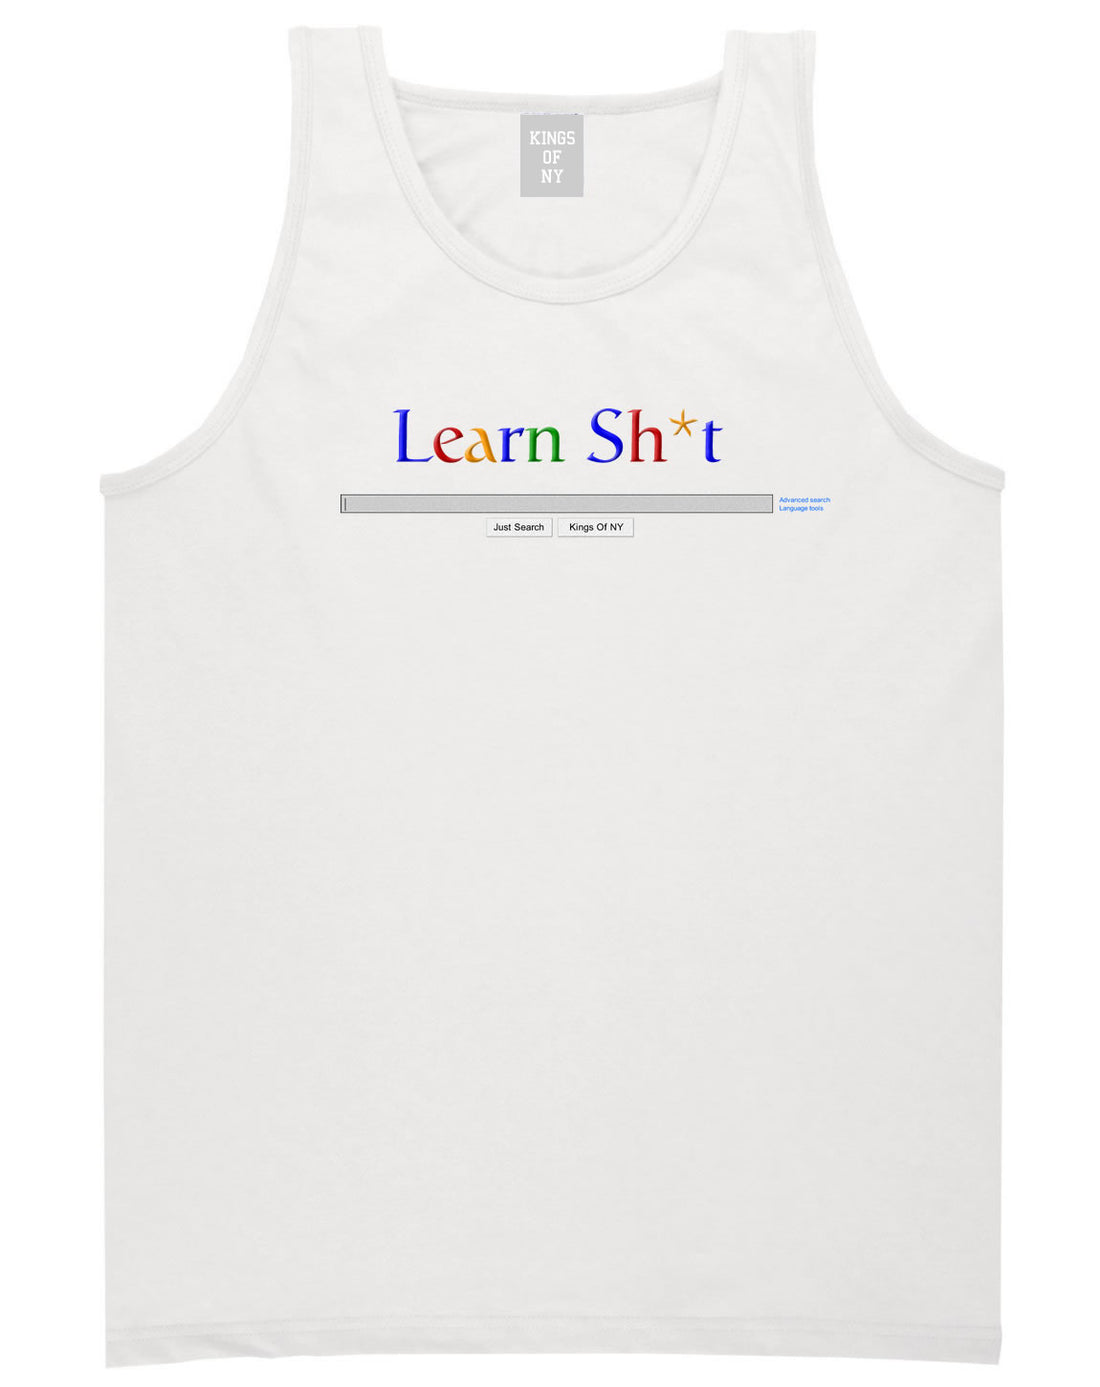 Learn Shit Search Tank Top in White By Kings Of NY